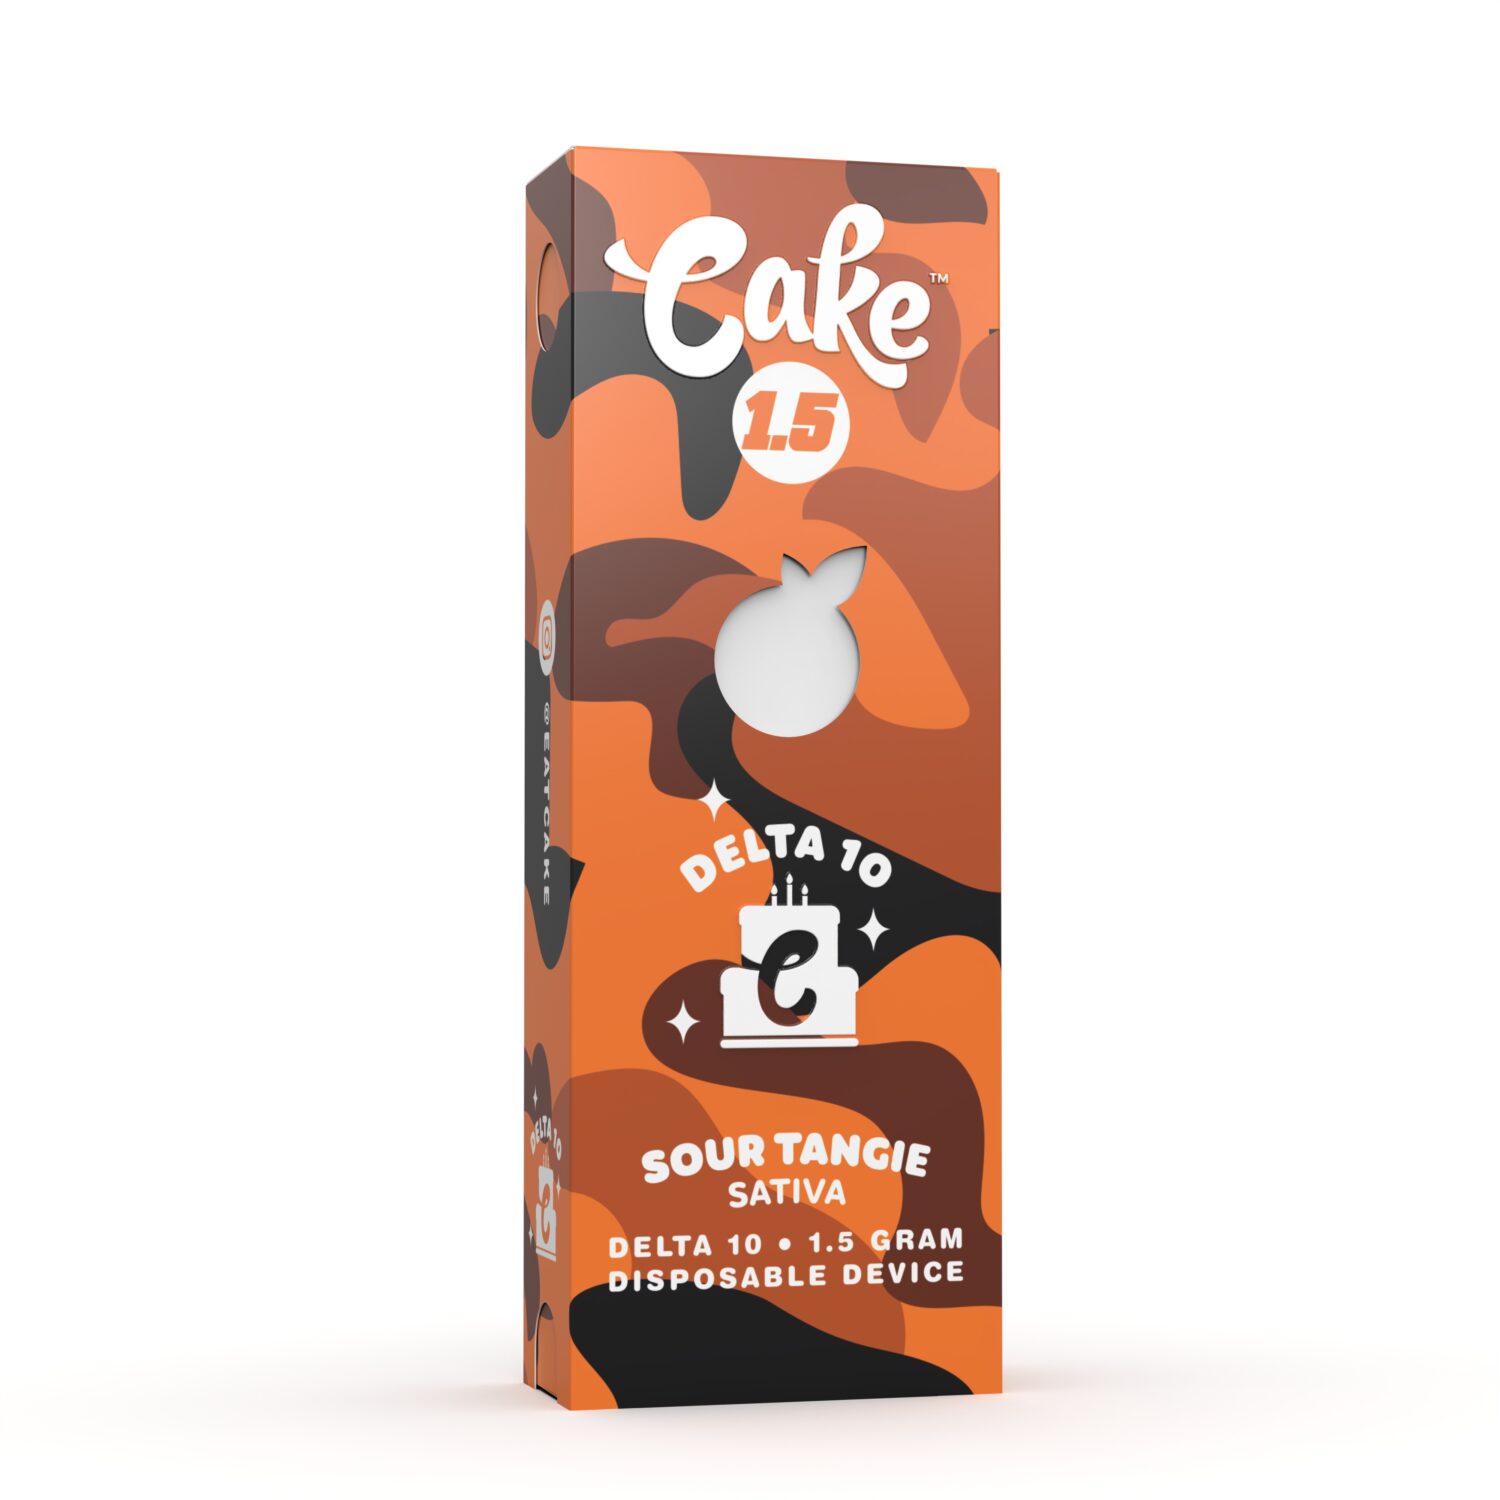 Cake-Delta-10-Disposable-1.5g-Sour-Tangie-scaled-1.jpg